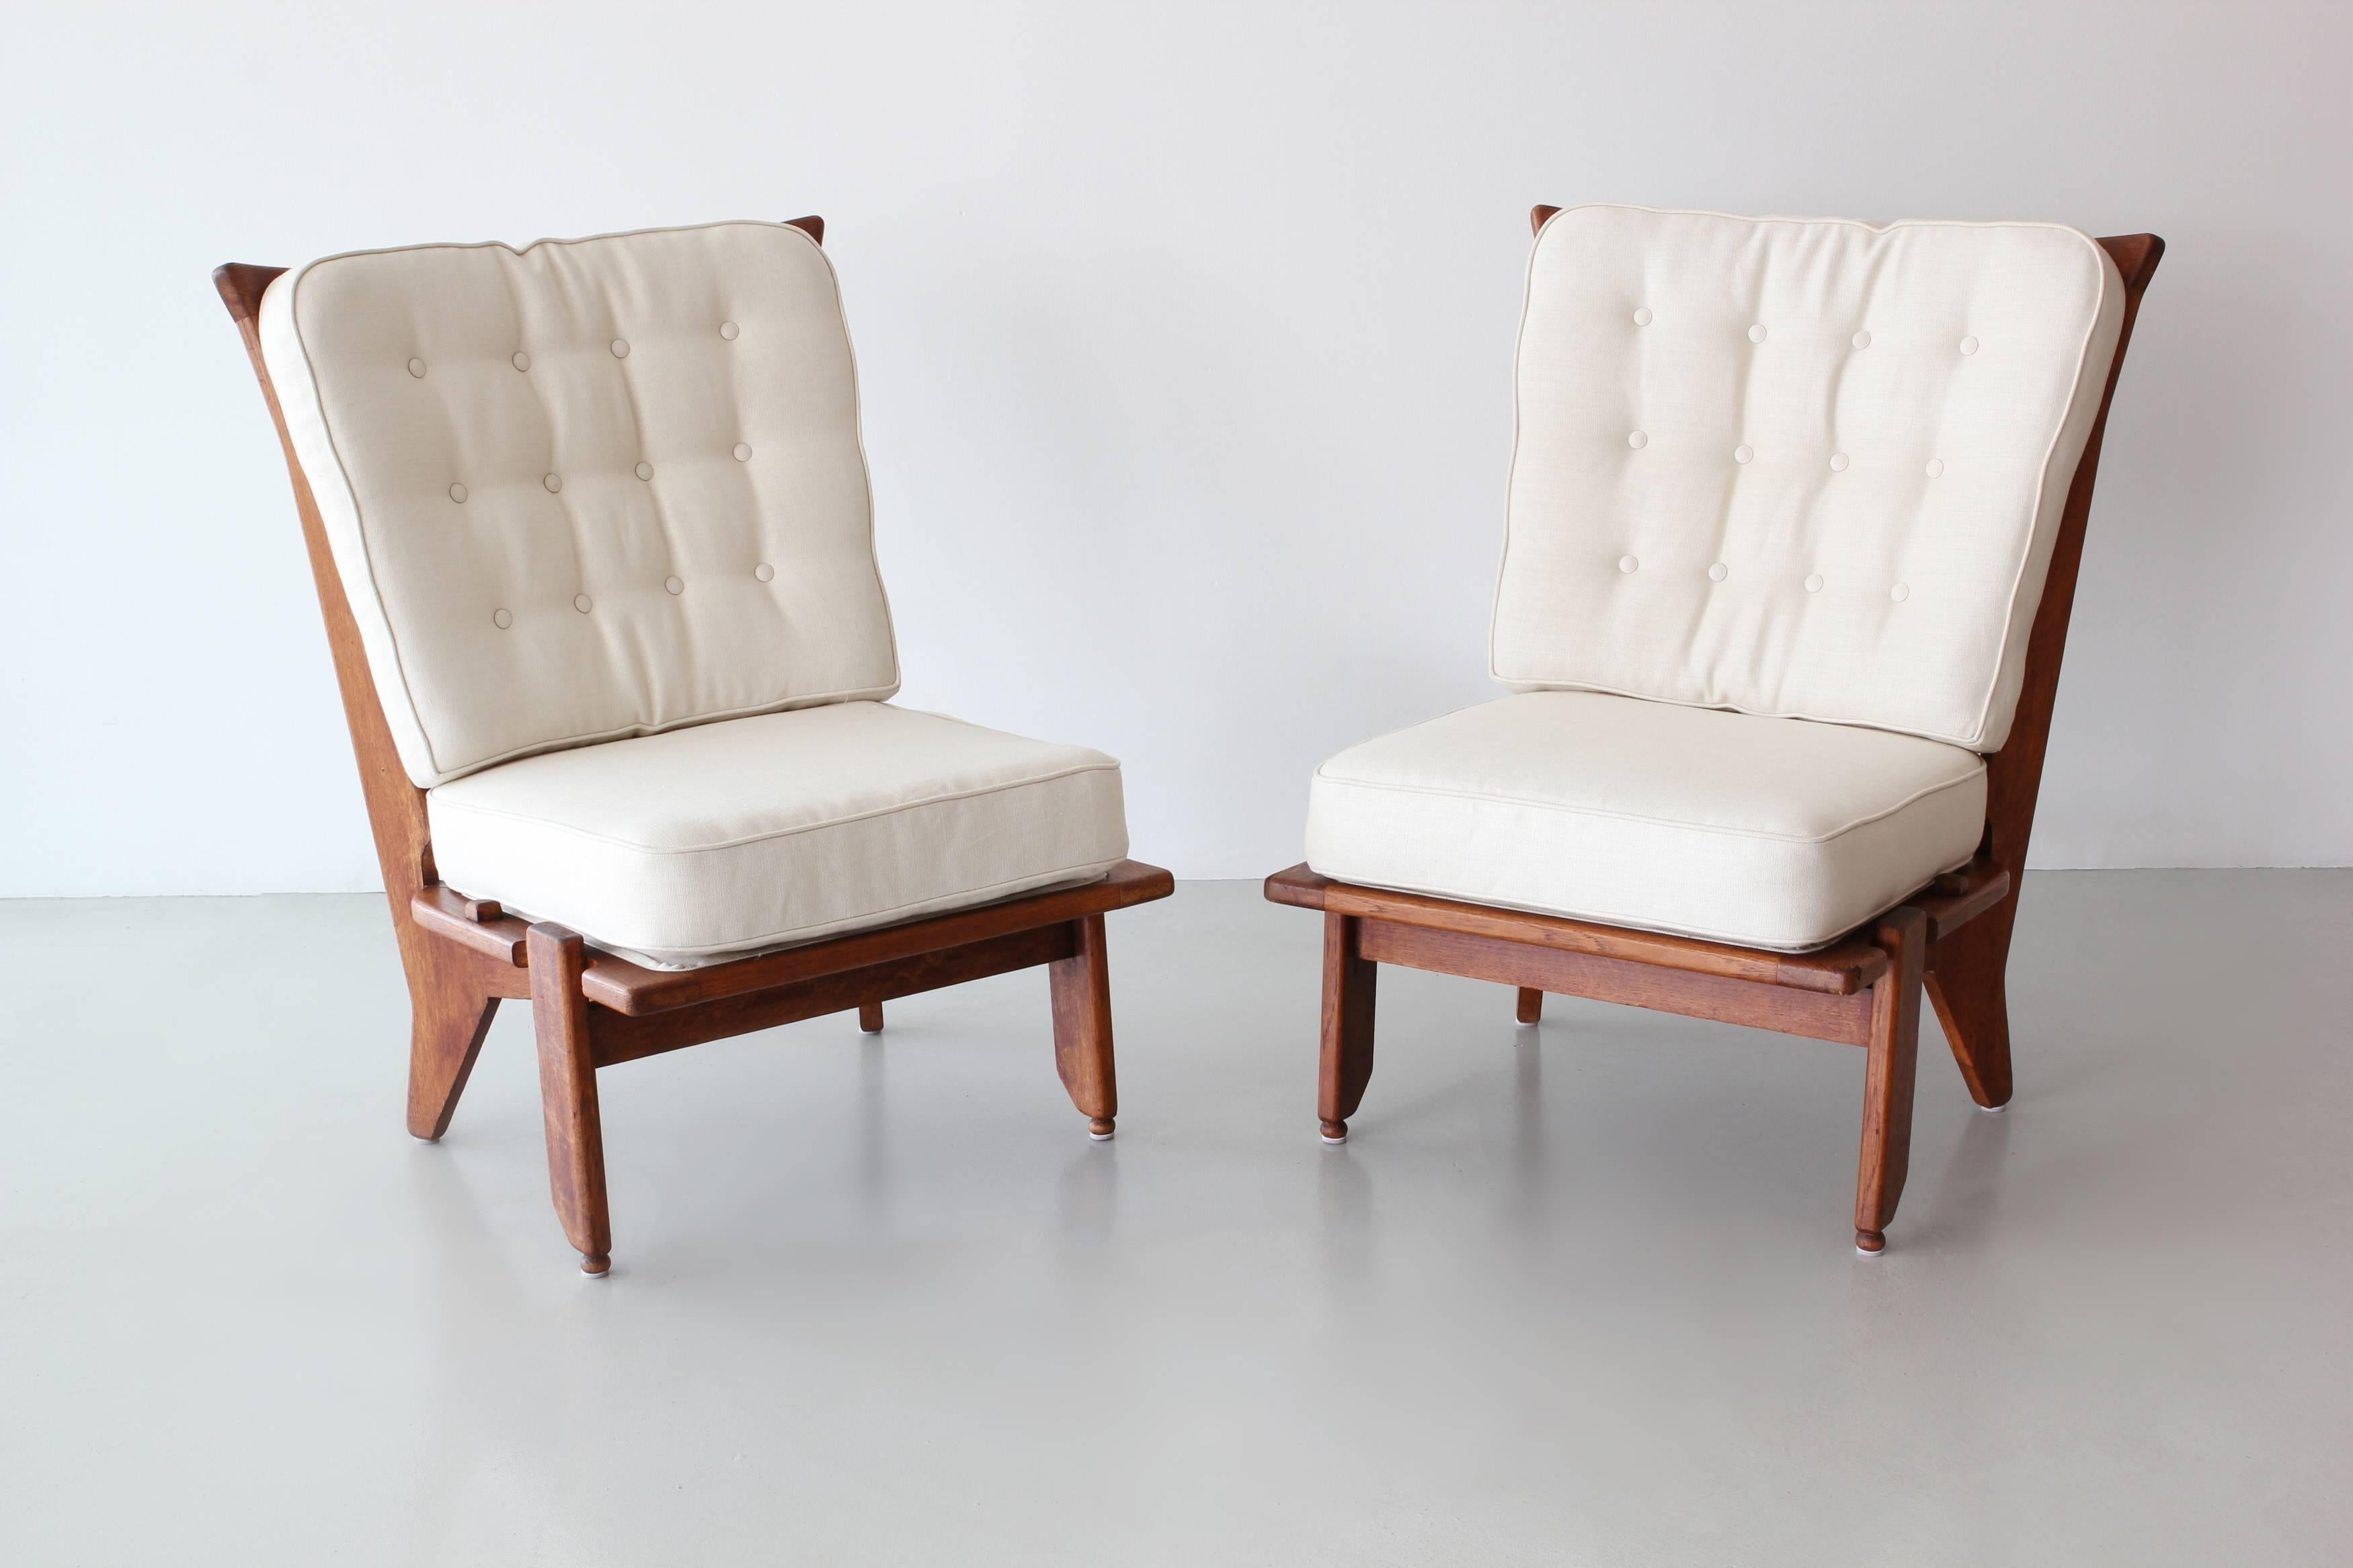 Pair of lounge chairs by Guillerme and Chambron.
Oak chairs with signature spindle back and great angled legged profile. 
Newly upholstered in linen.